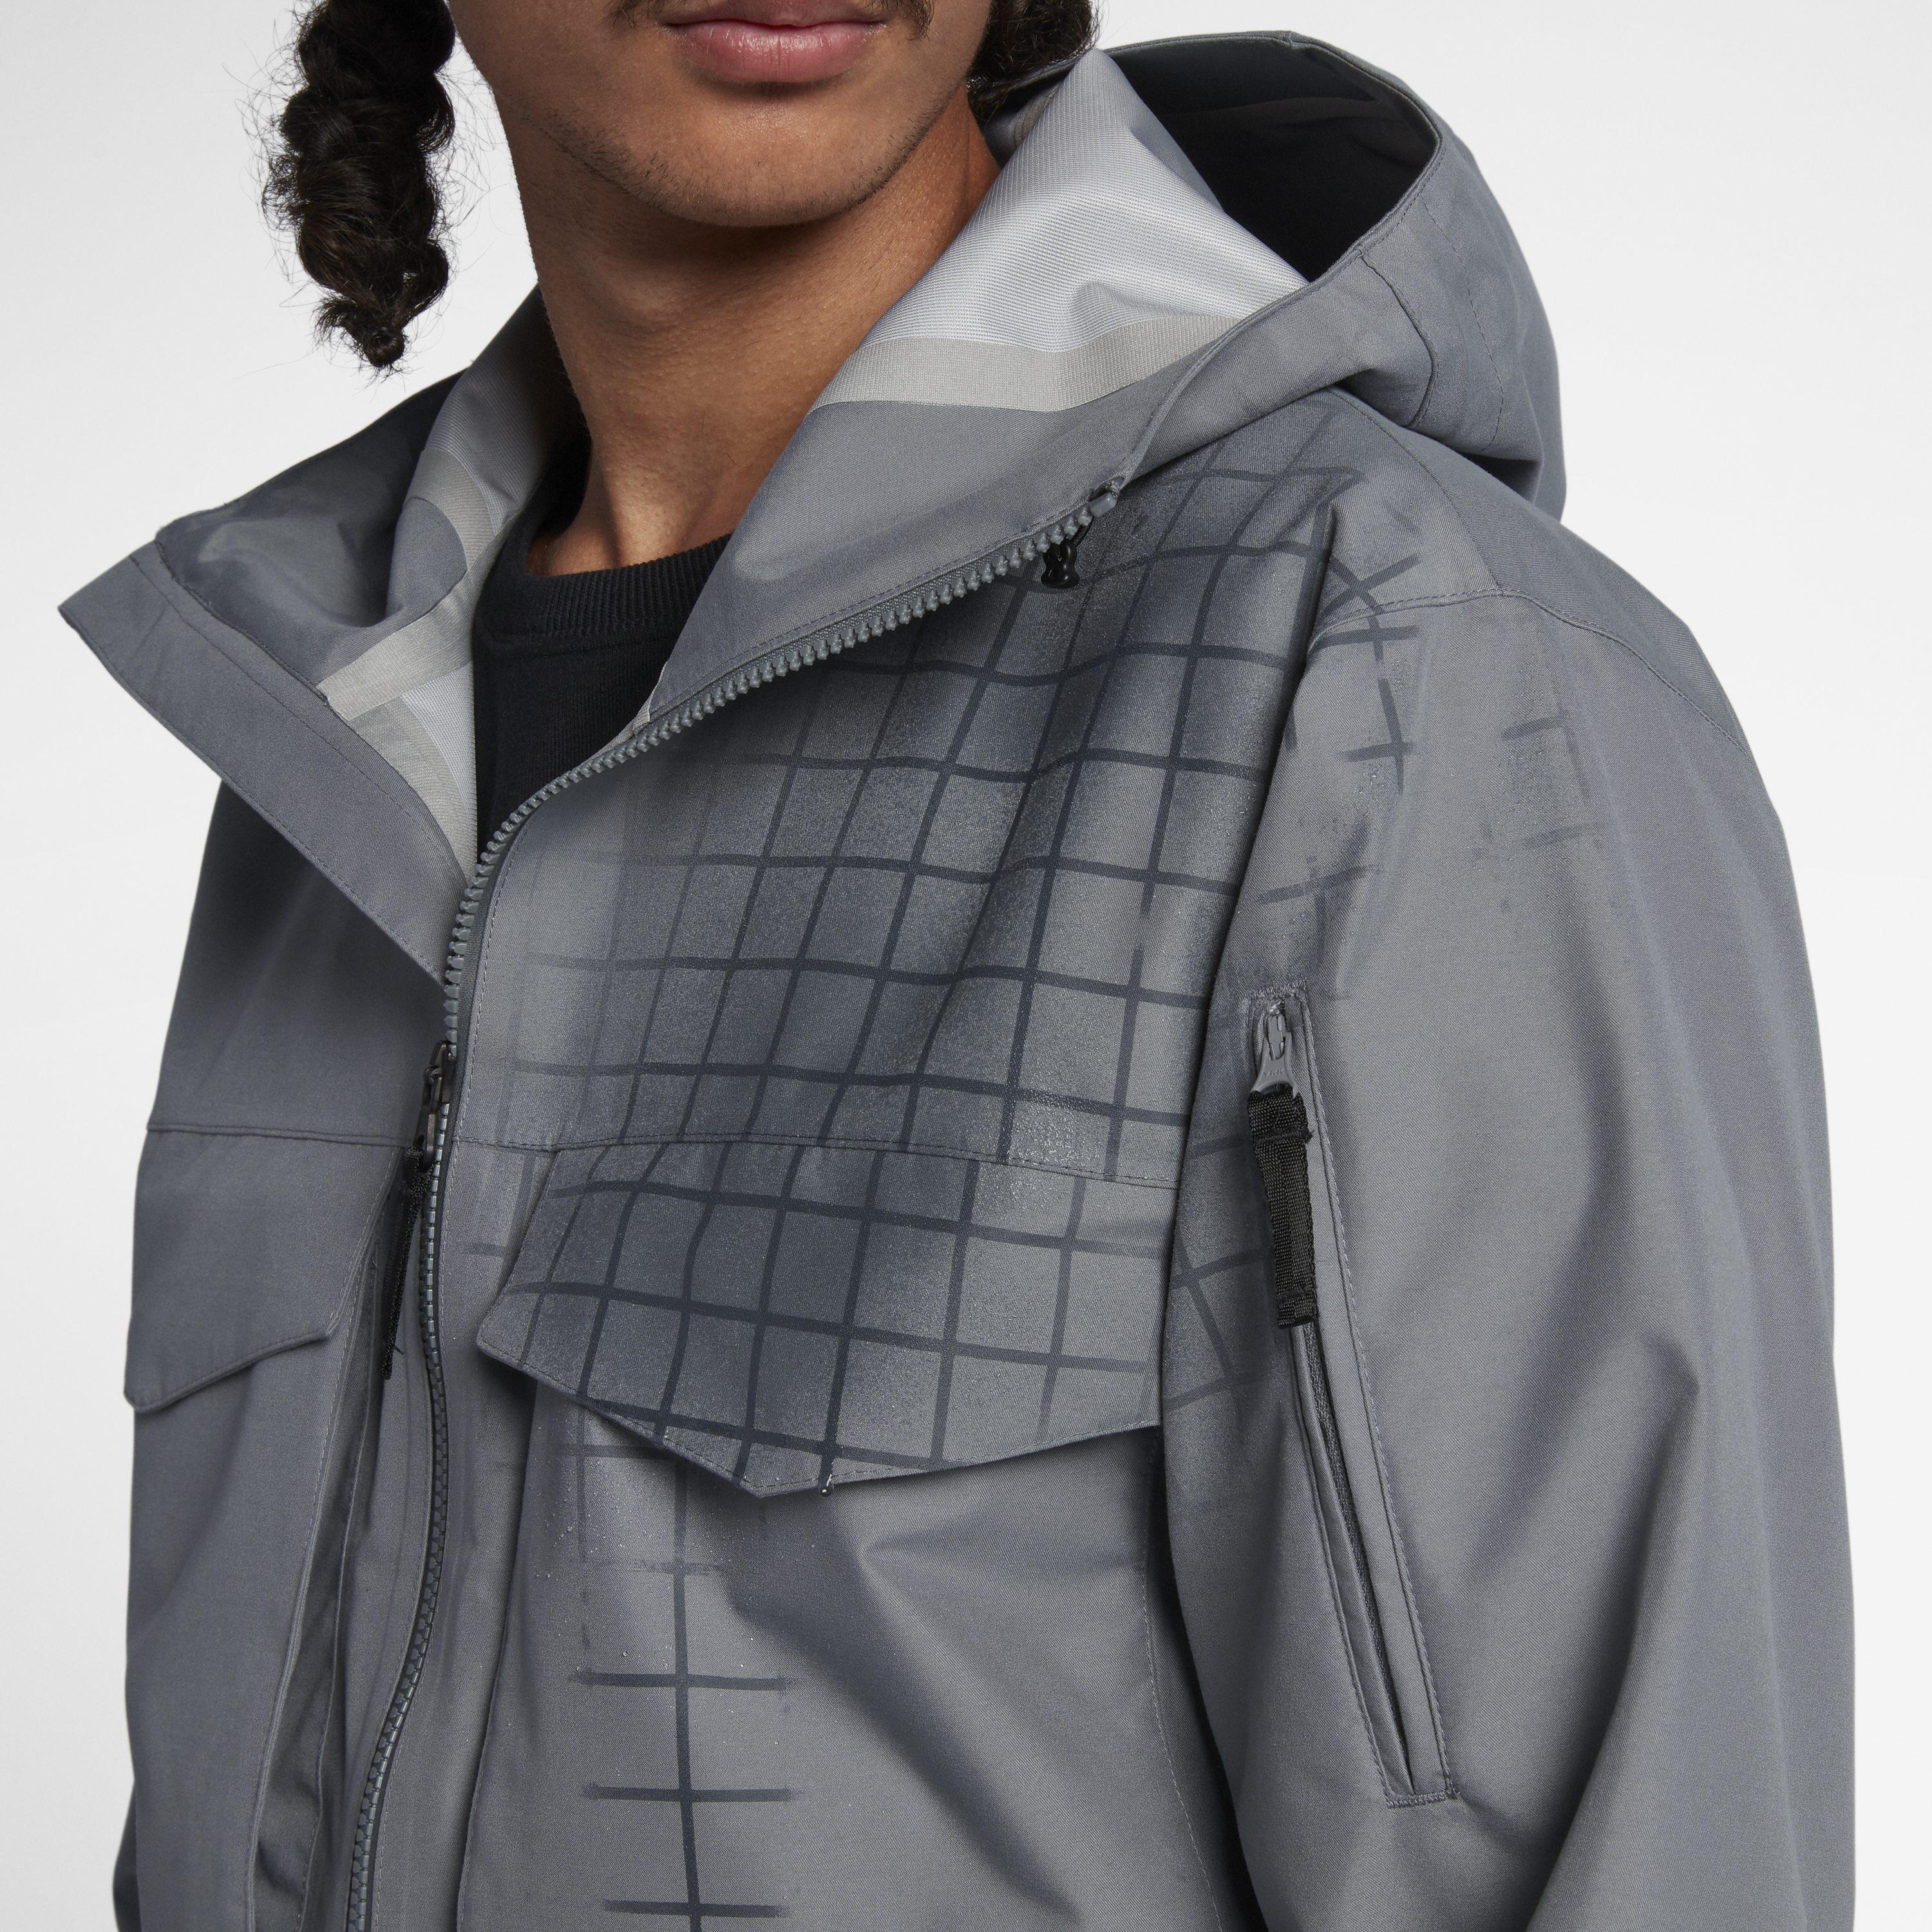 Nike Lab Collection Wet Reveal Jacket in Grey (Grey) for Men - Lyst